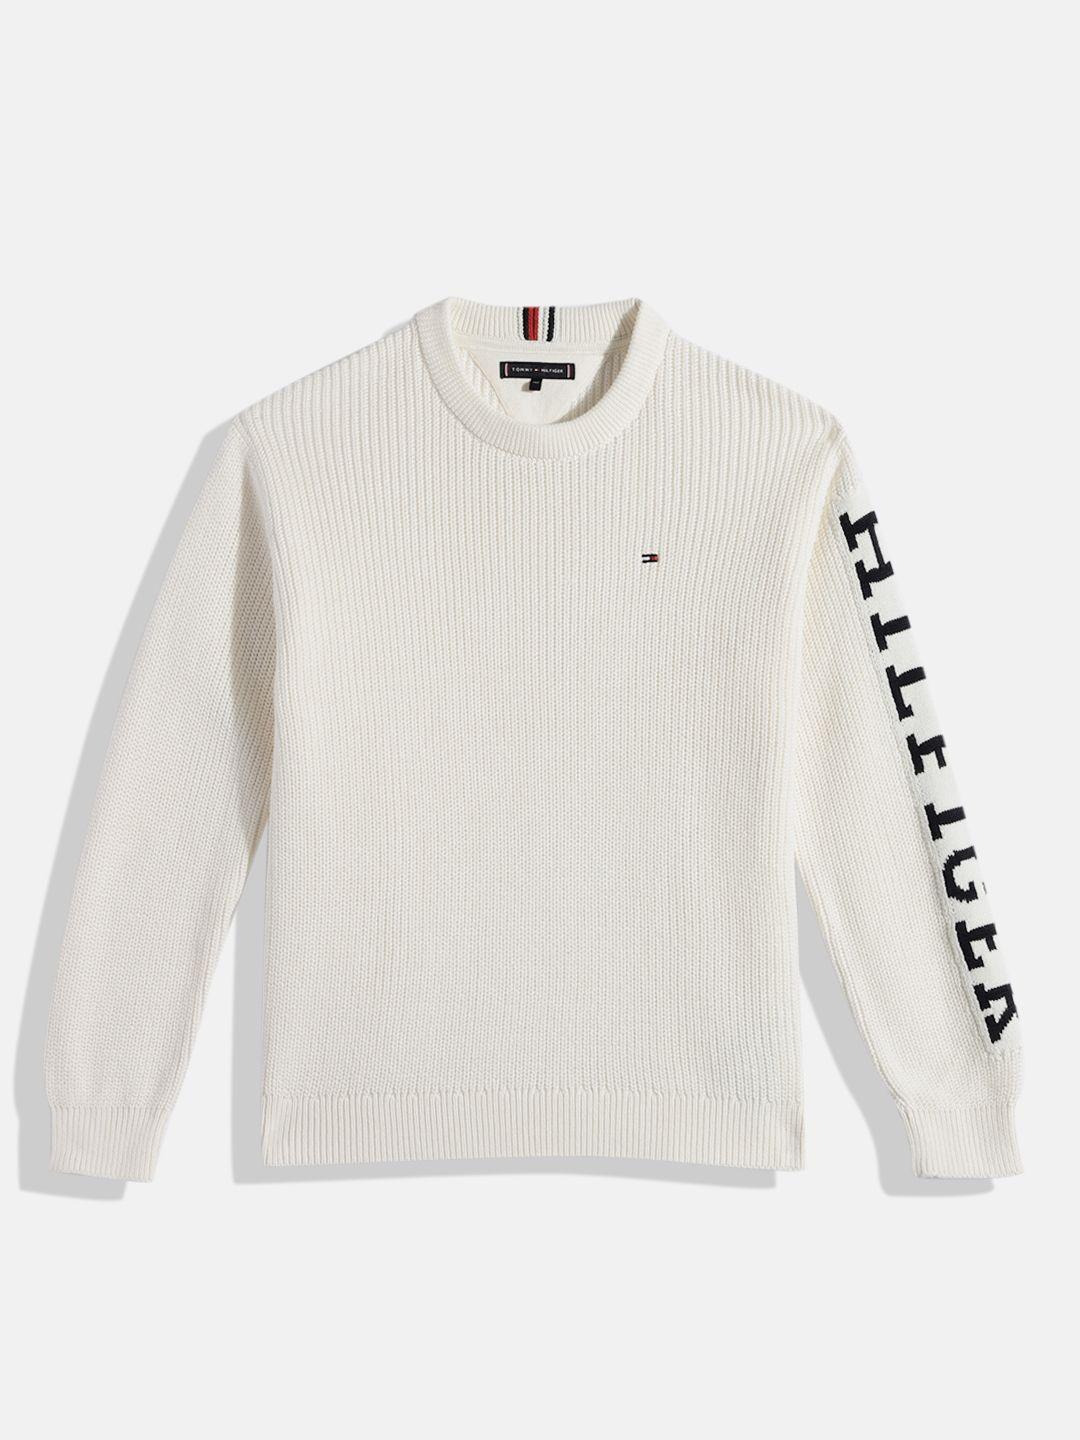 tommy hilfiger boys brand logo embroidered pullover